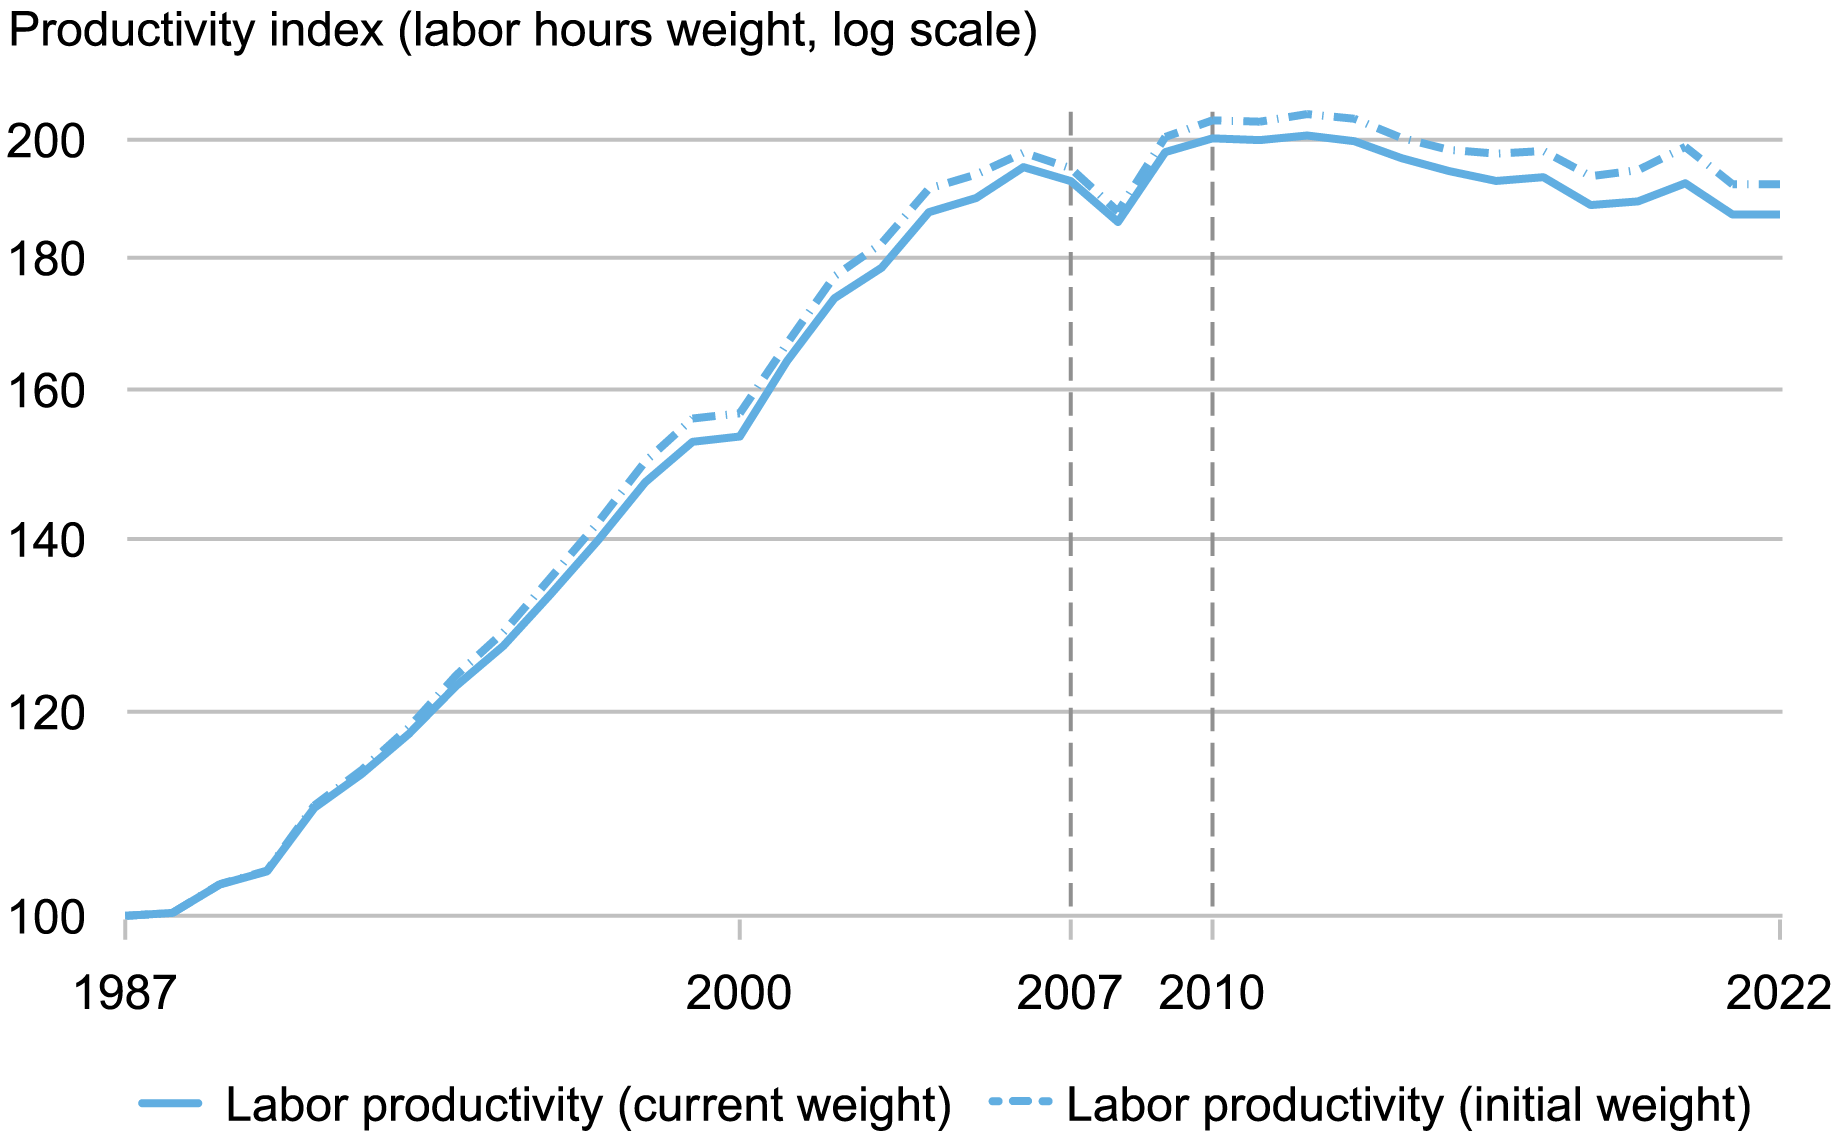 line chart tracking labor productivity index from 1987 to 2022 for current weight (blue solid) and initial rate using 1987 values (blue dotted